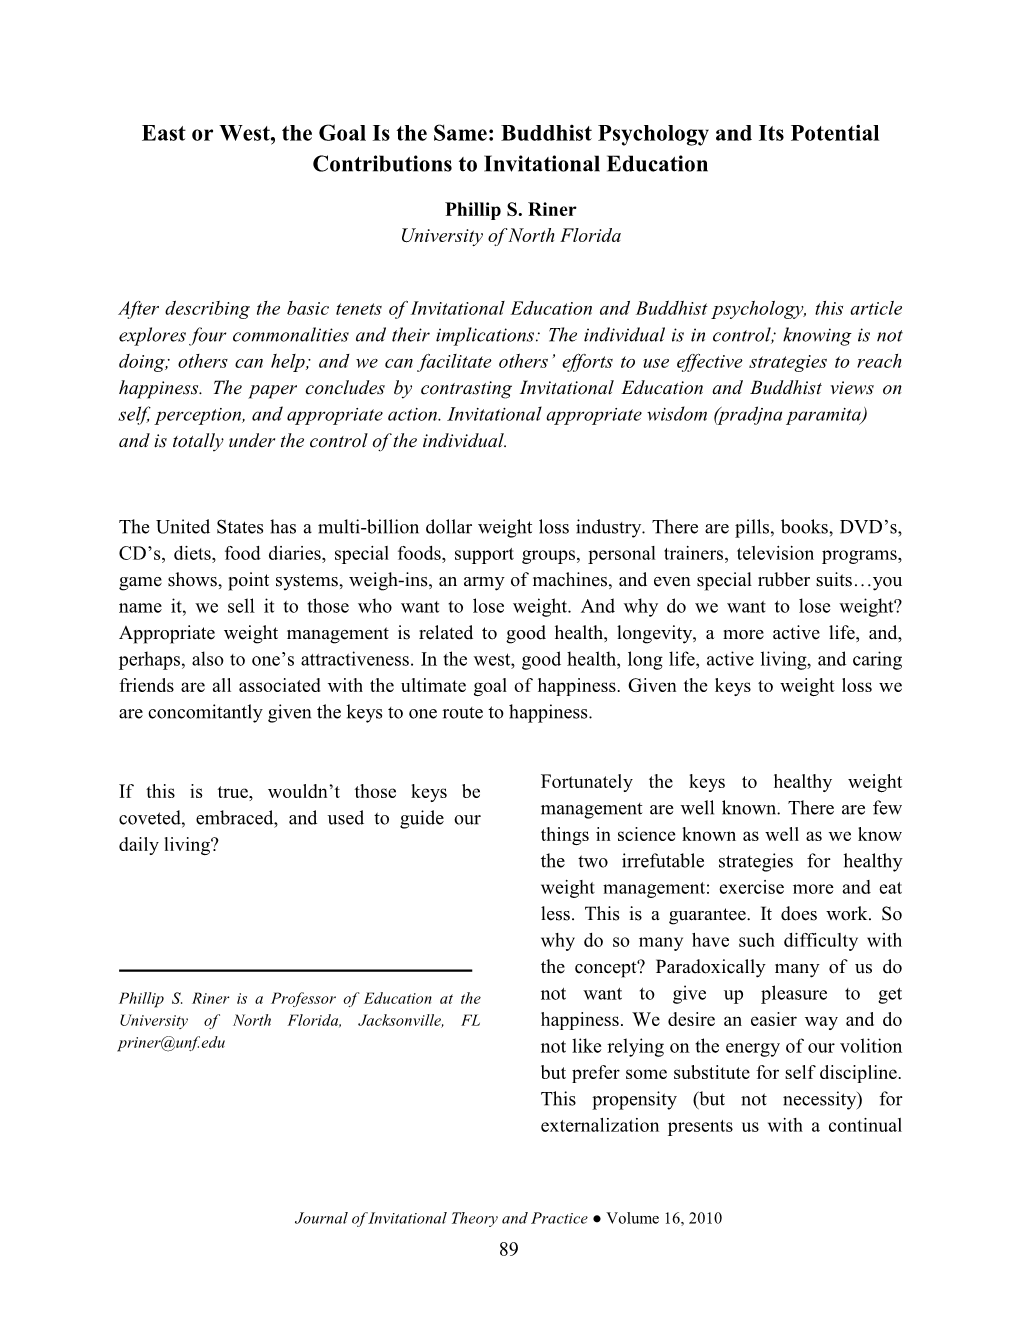 Buddhist Psychology and Its Potential Contributions to Invitational Education